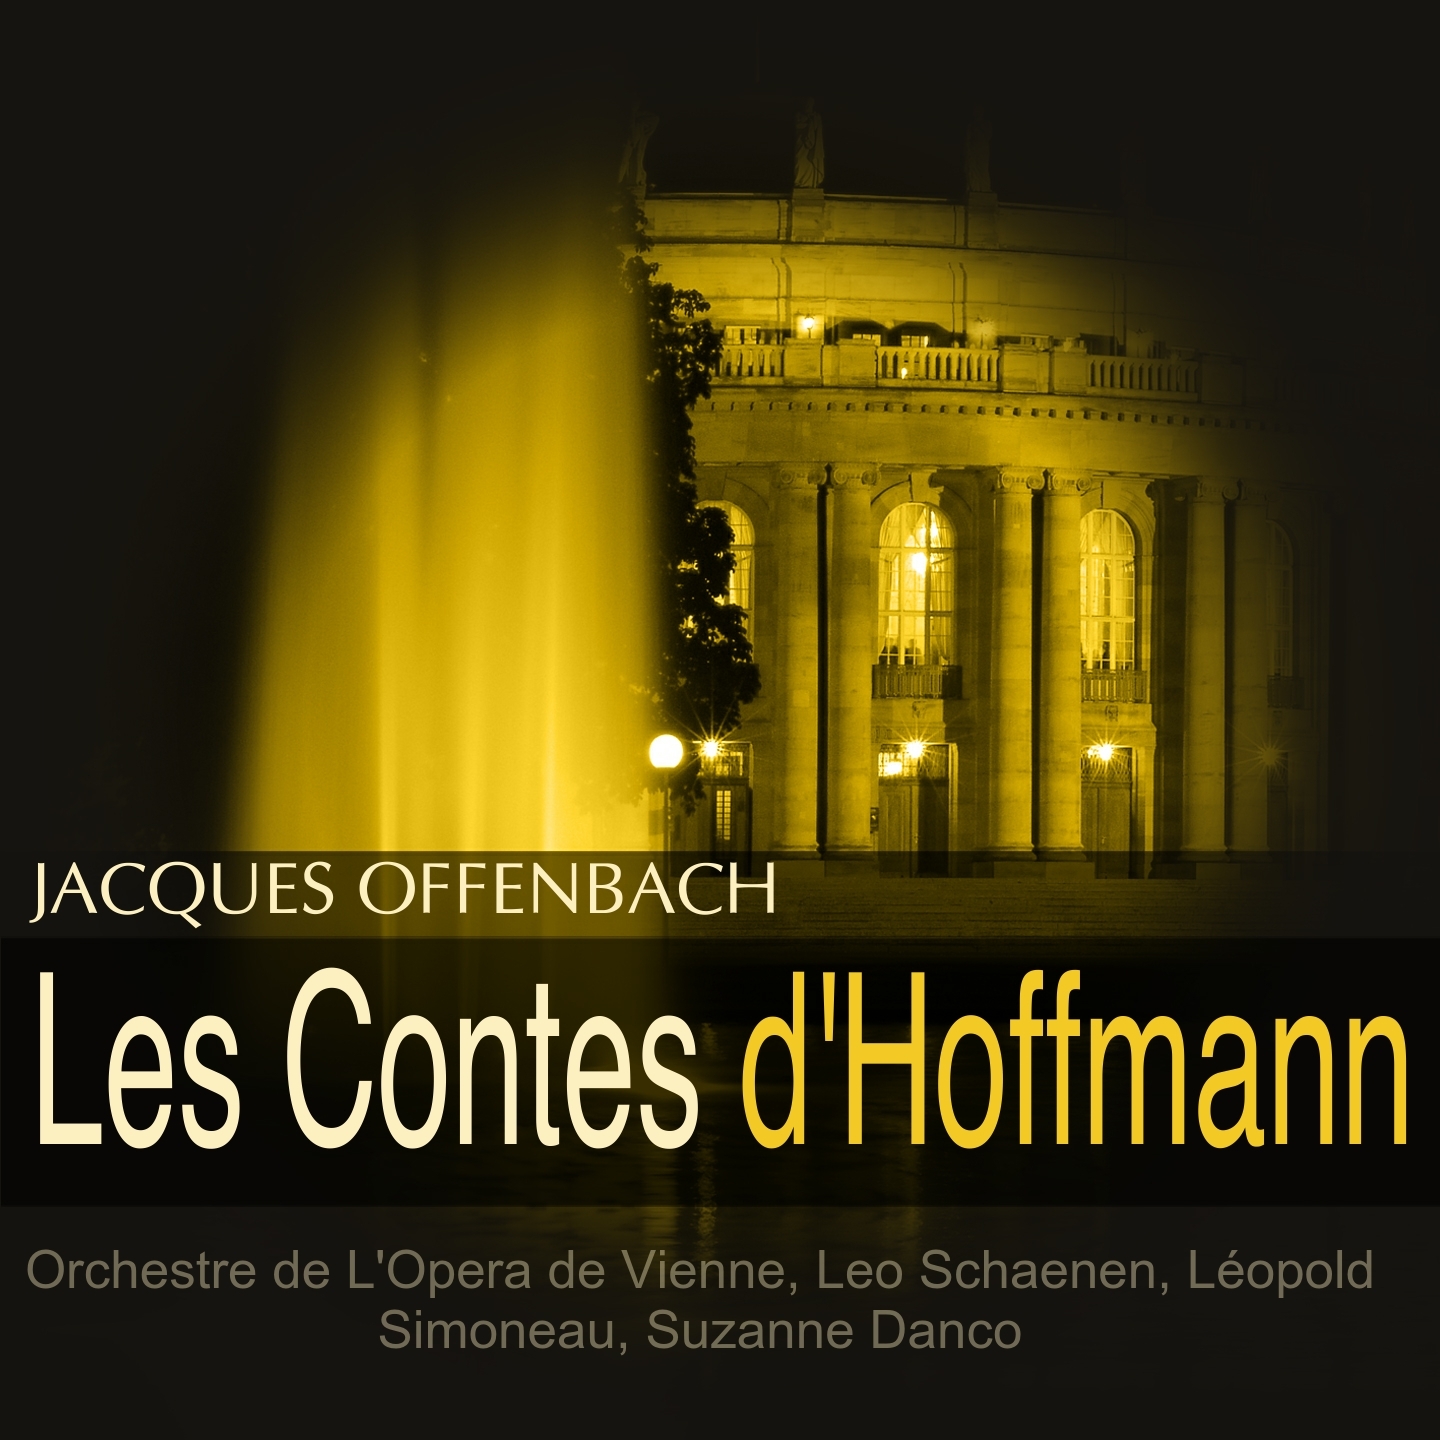 Les contes d' Hoffmann, Act I: Pre lude